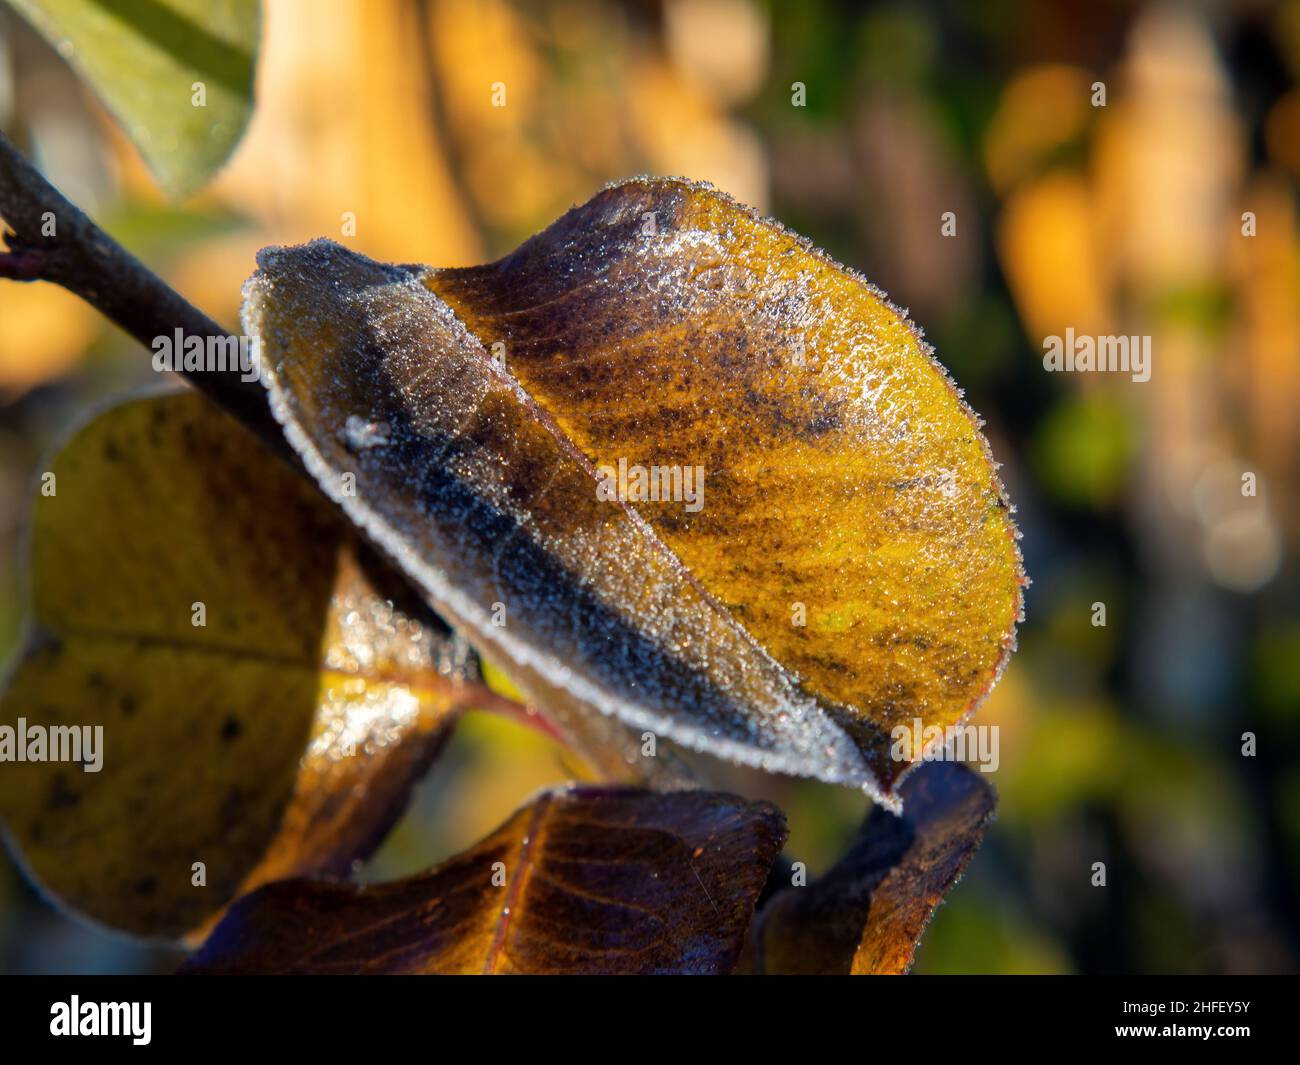 leaves of the tree in frost in the early morning, autumn Stock Photo